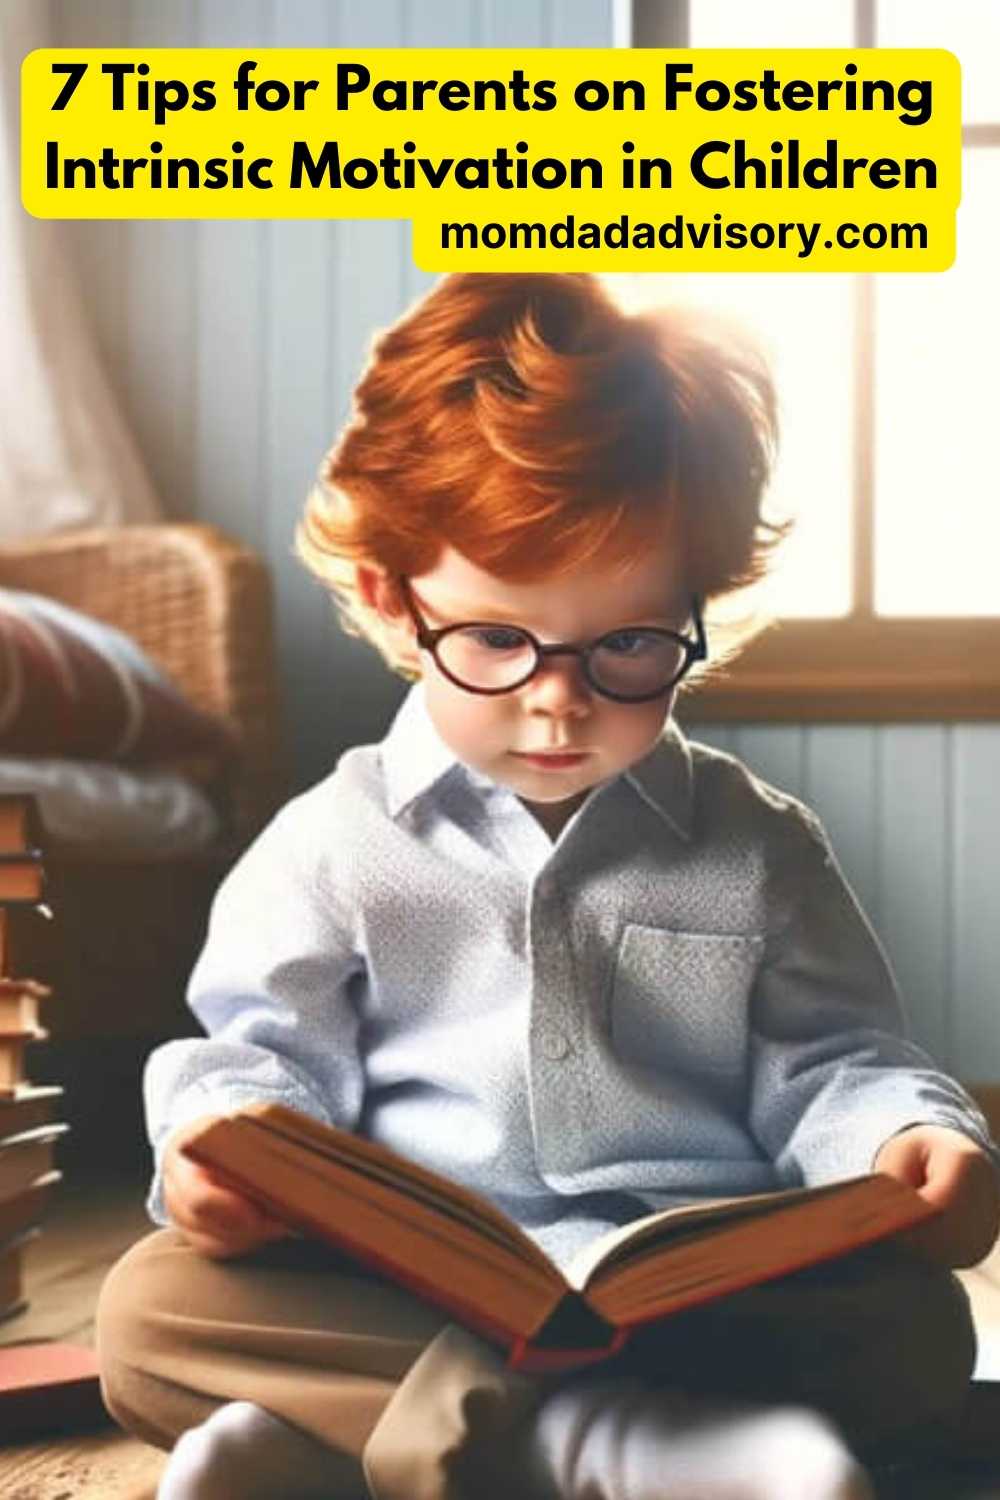 young child deeply engrossed in reading a book. The child has red hair, wears glasses, and is dressed